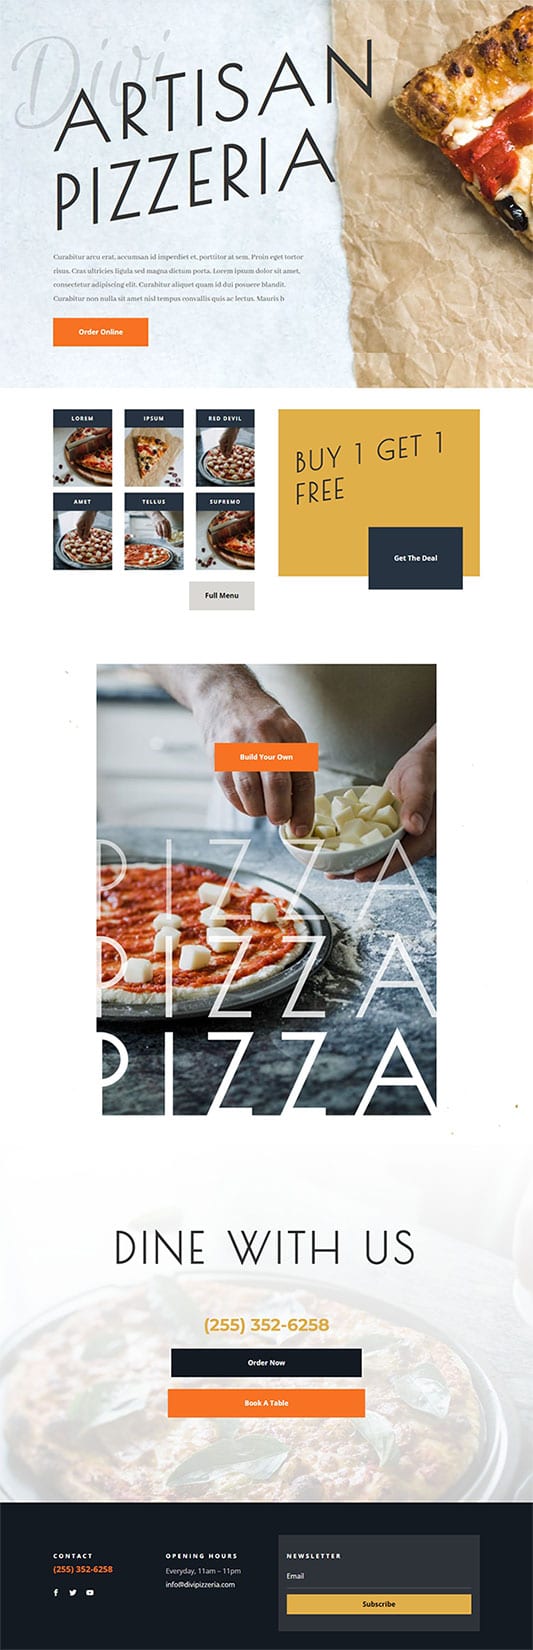 Pizzeria Home Page